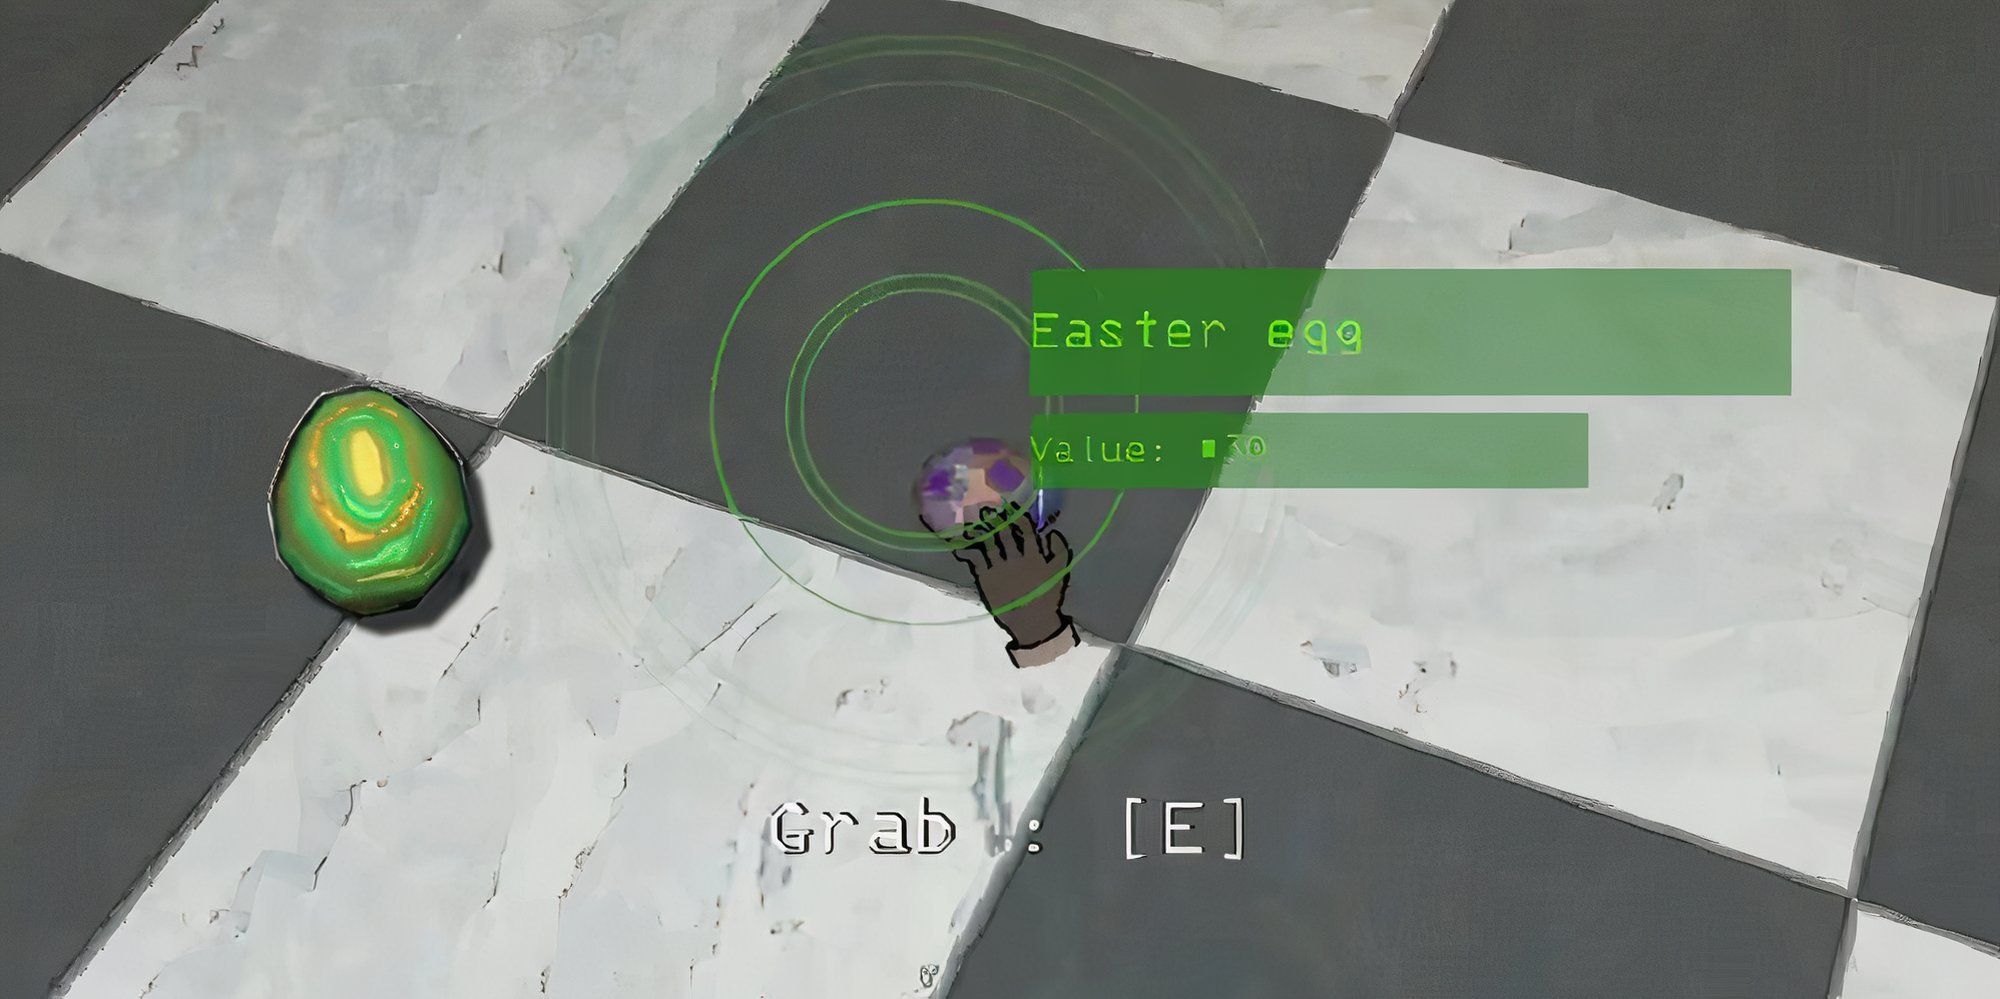 The Easter Egg weapon item